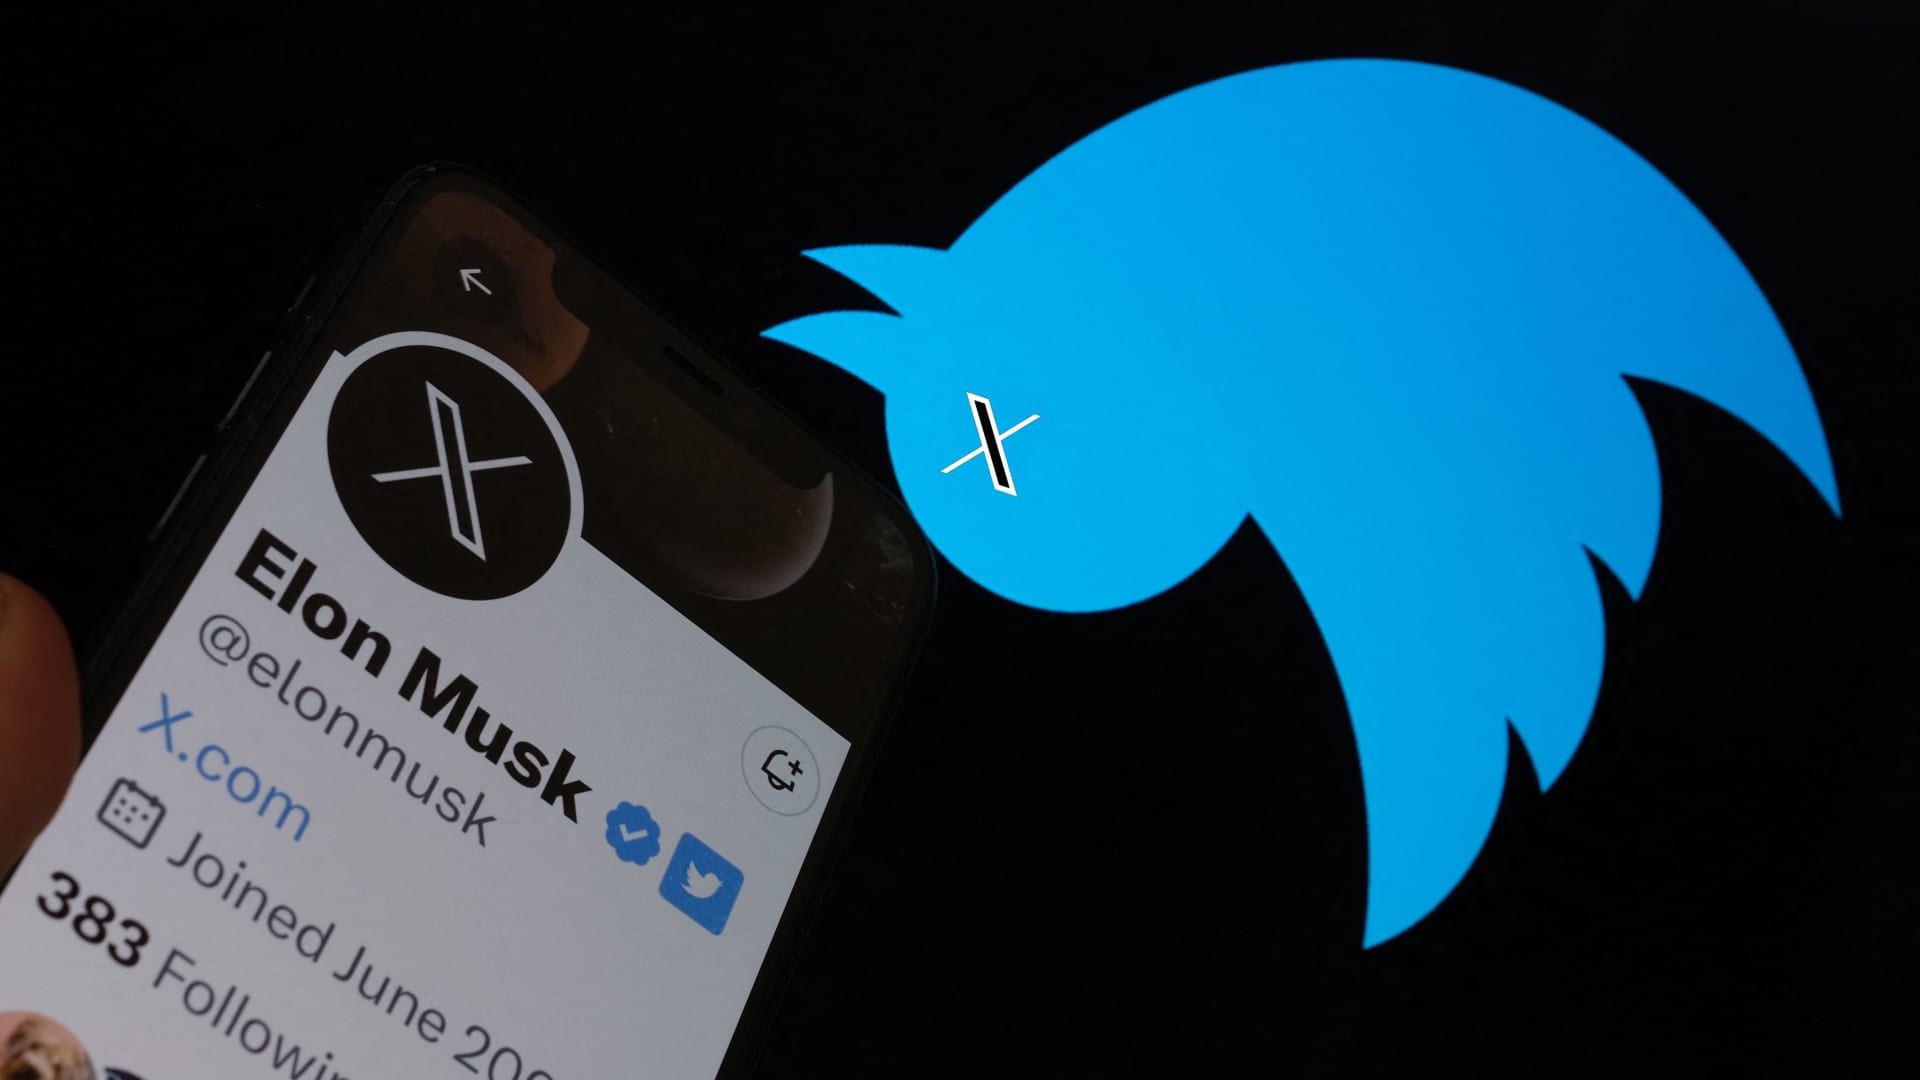 X logo officially replaces Twitter’s famous bird on mobile app